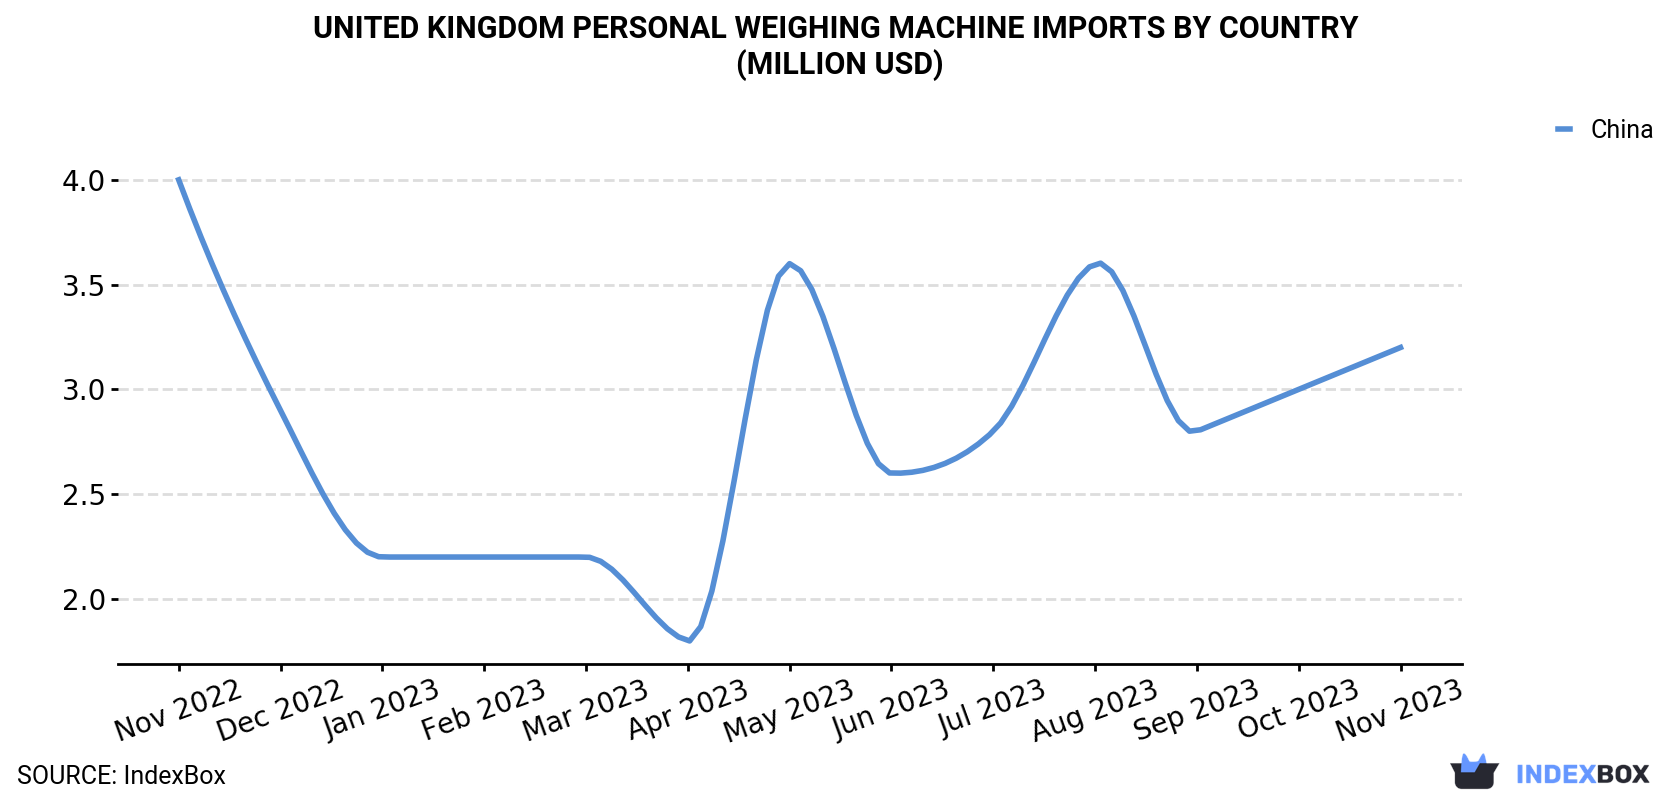 United Kingdom Personal Weighing Machine Imports By Country (Million USD)